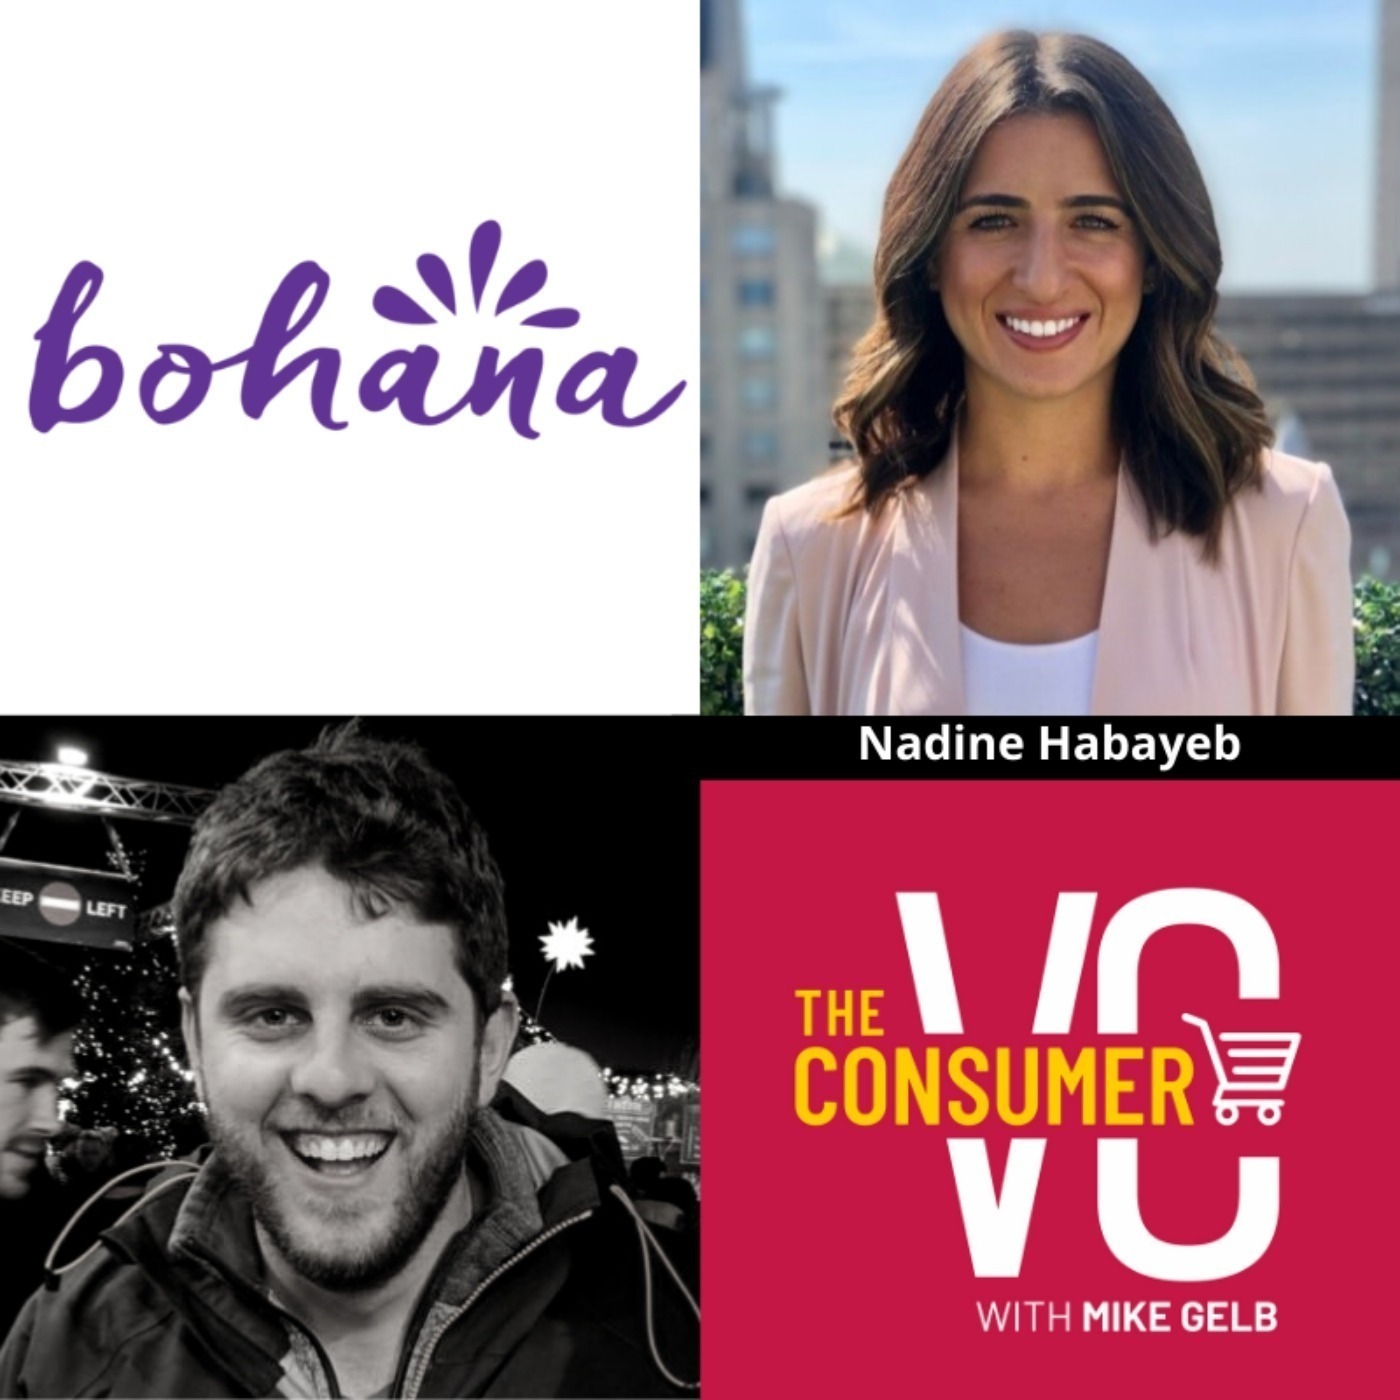 Nadine Habayeb (Bohana) - The Future of Superfood Healthy Snacks, How Eastern Traditions Have Migrated West, and Finding Product-Market Fit